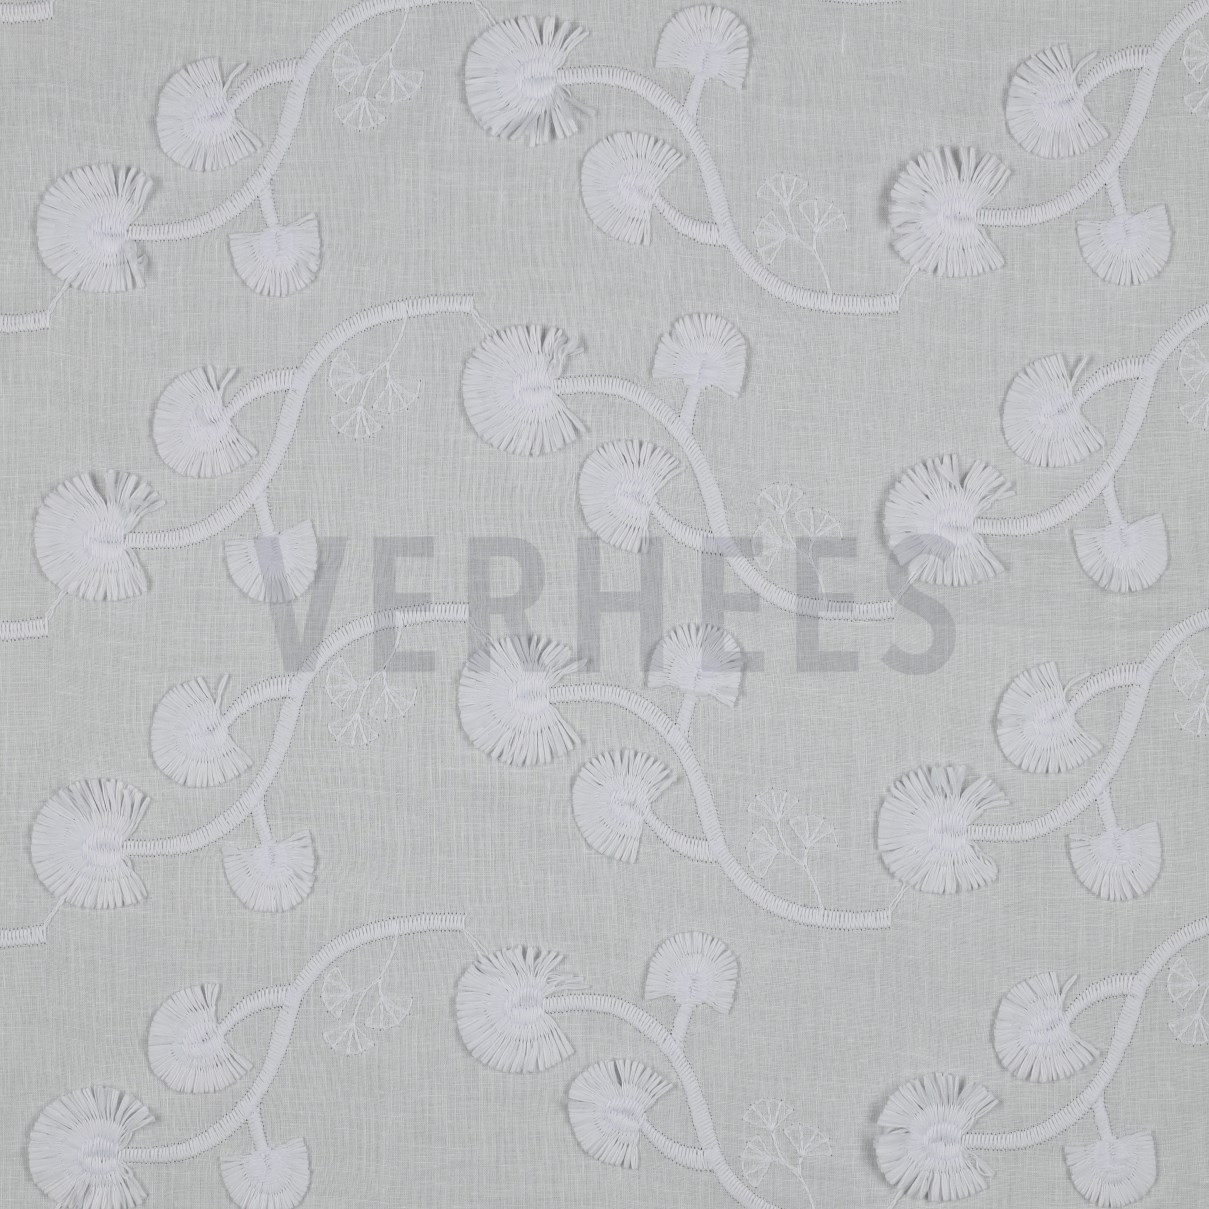 COTTON VOILE EMBROIDERY FLOWERS WHITE (high resolution)